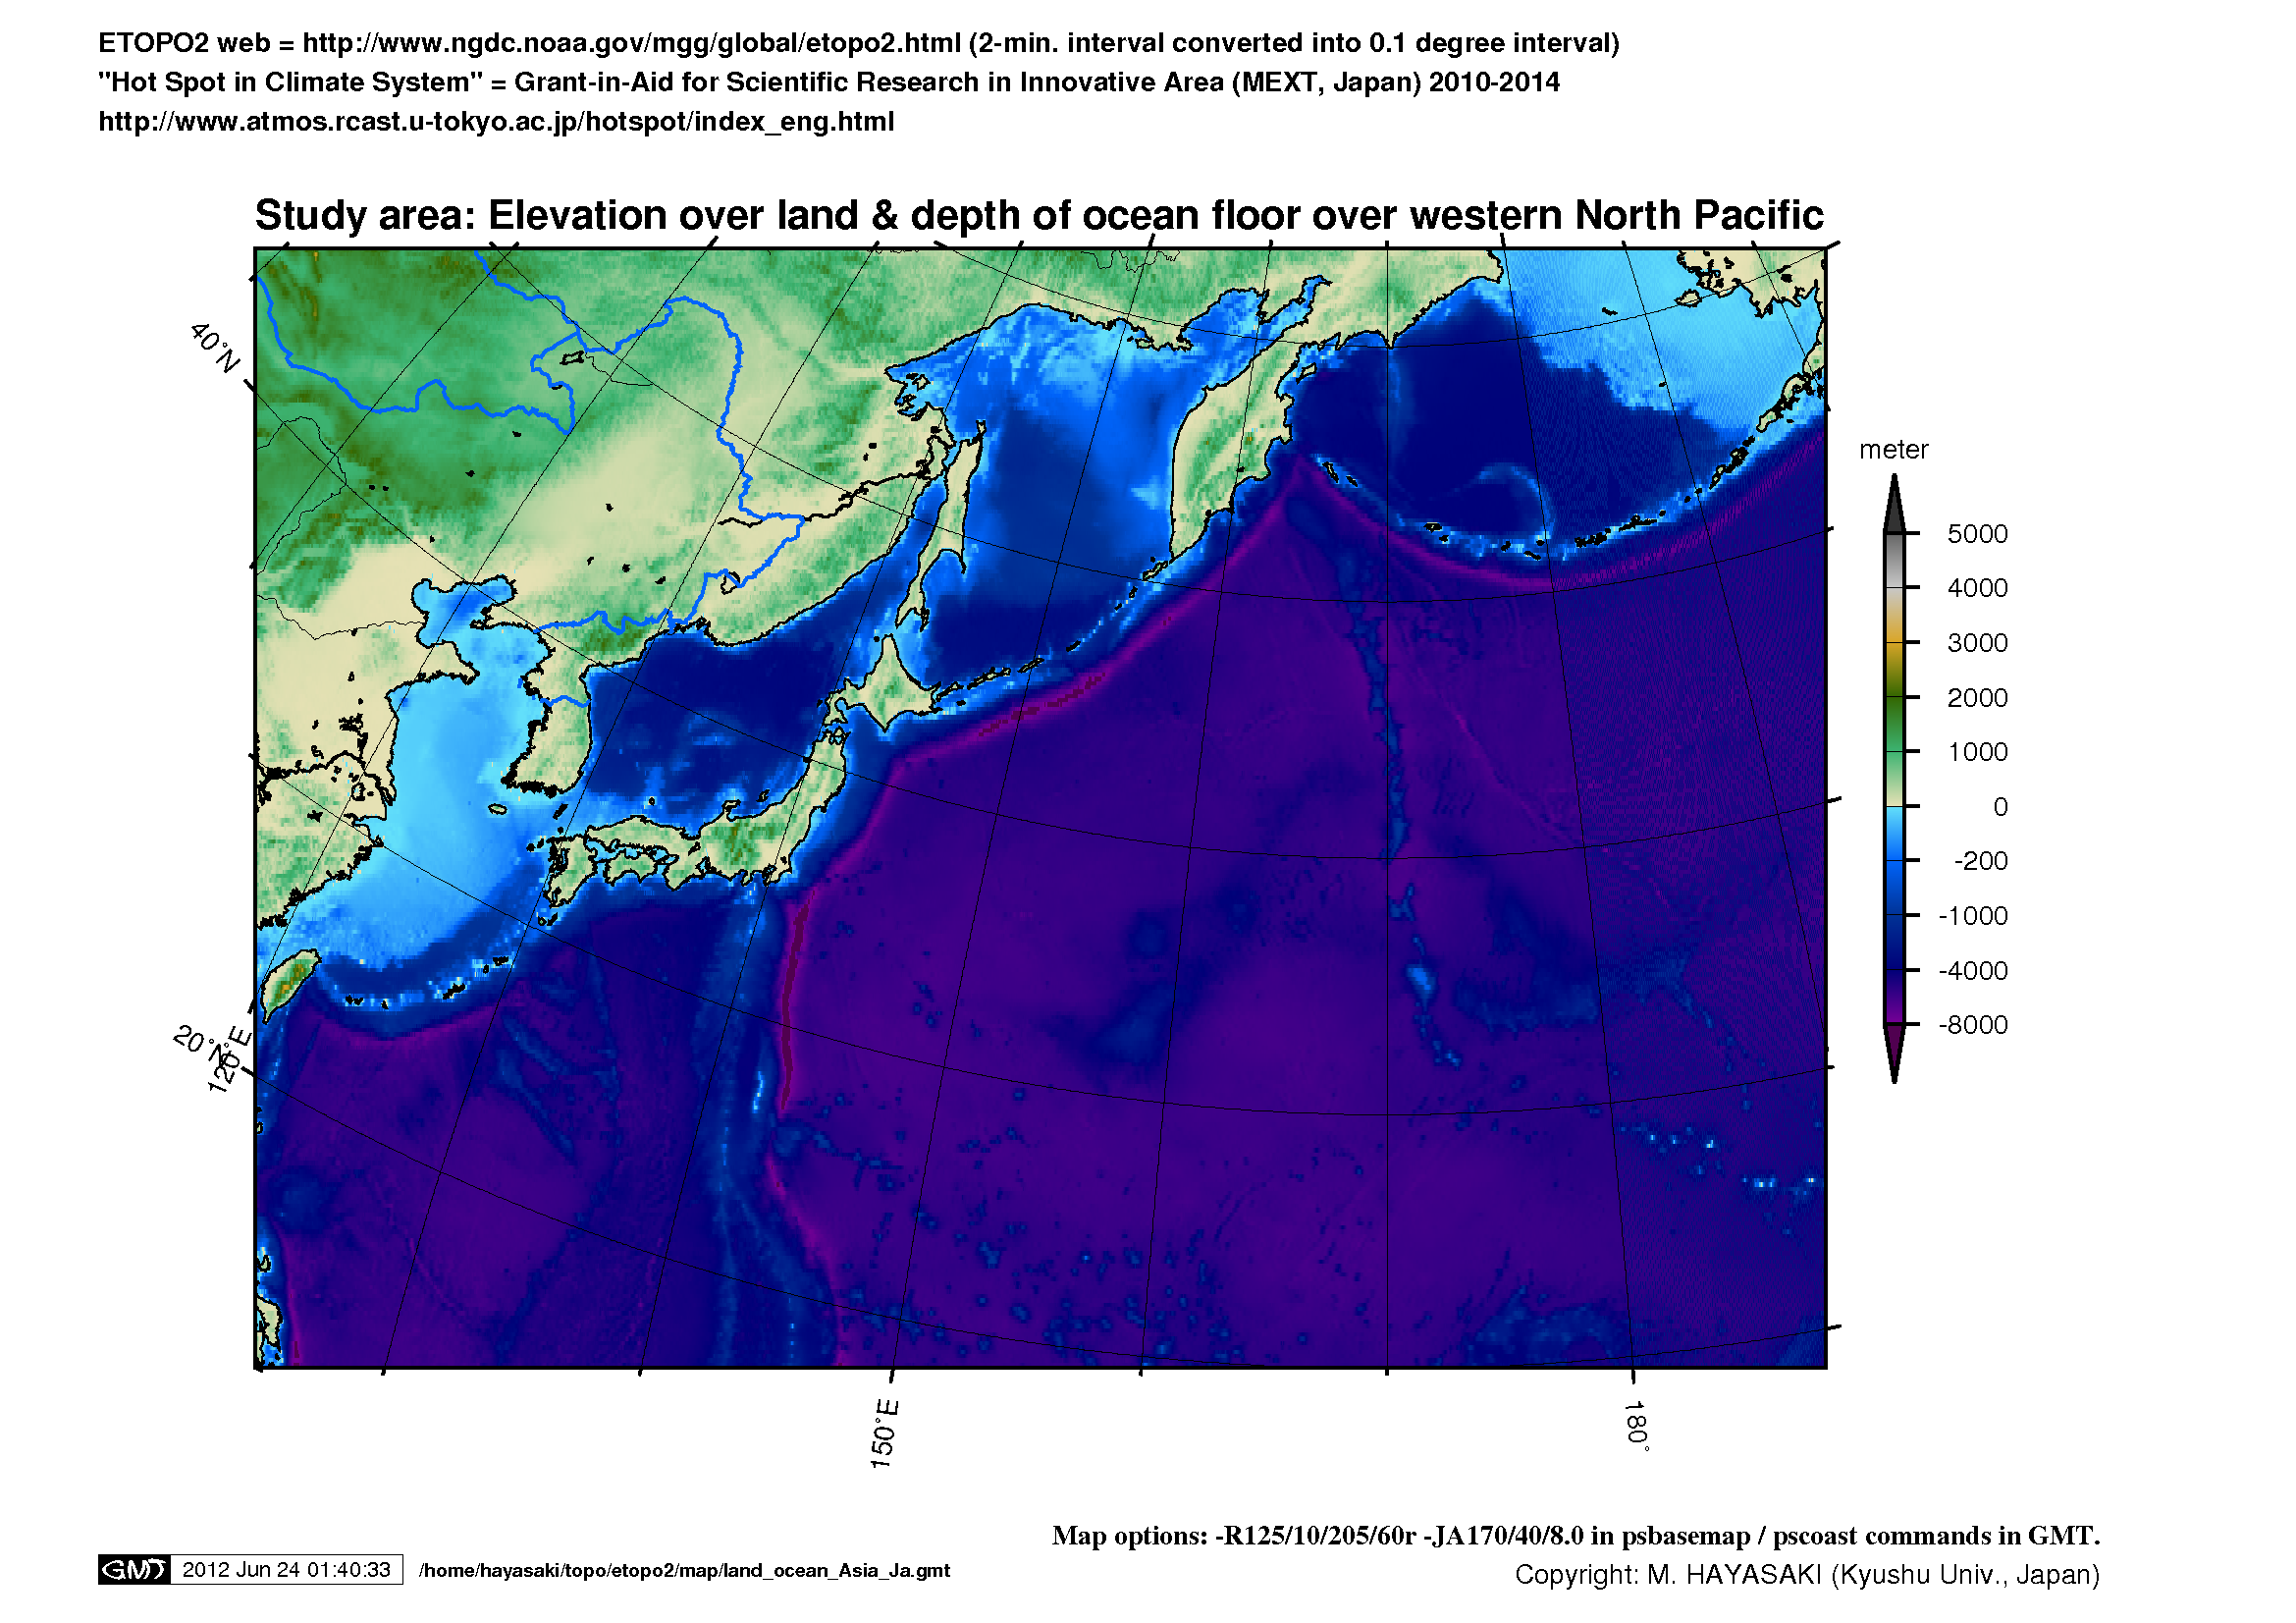 Elevation and ocean depth over western N. Pacific